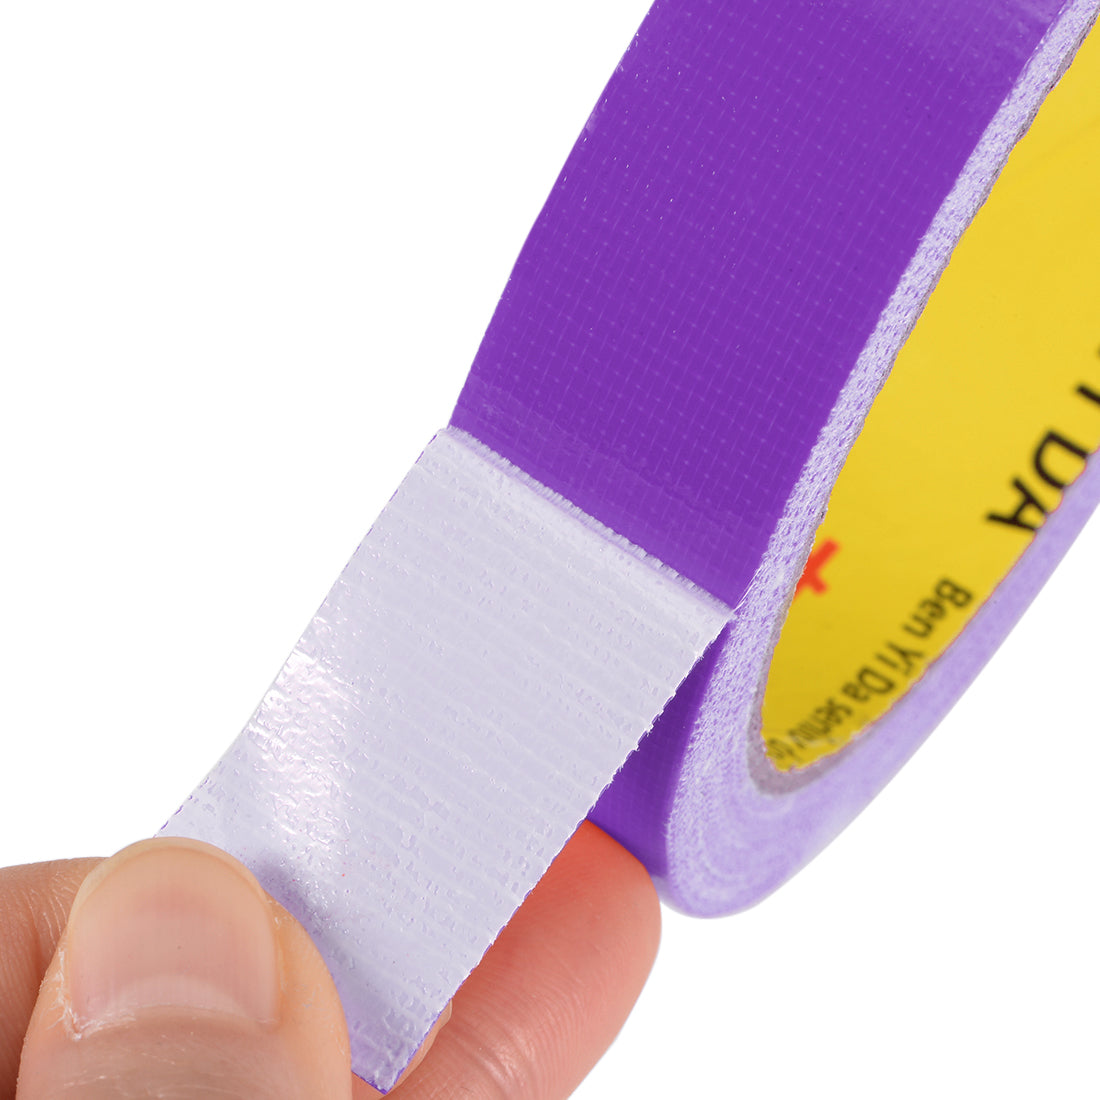 uxcell Uxcell Cloth Duct Tape Single Side Adhesive Tape Moisture-proof for Crafts, Home Improvement, Repairs, 33 Ft x 0.8 Inch(LxW), Purple